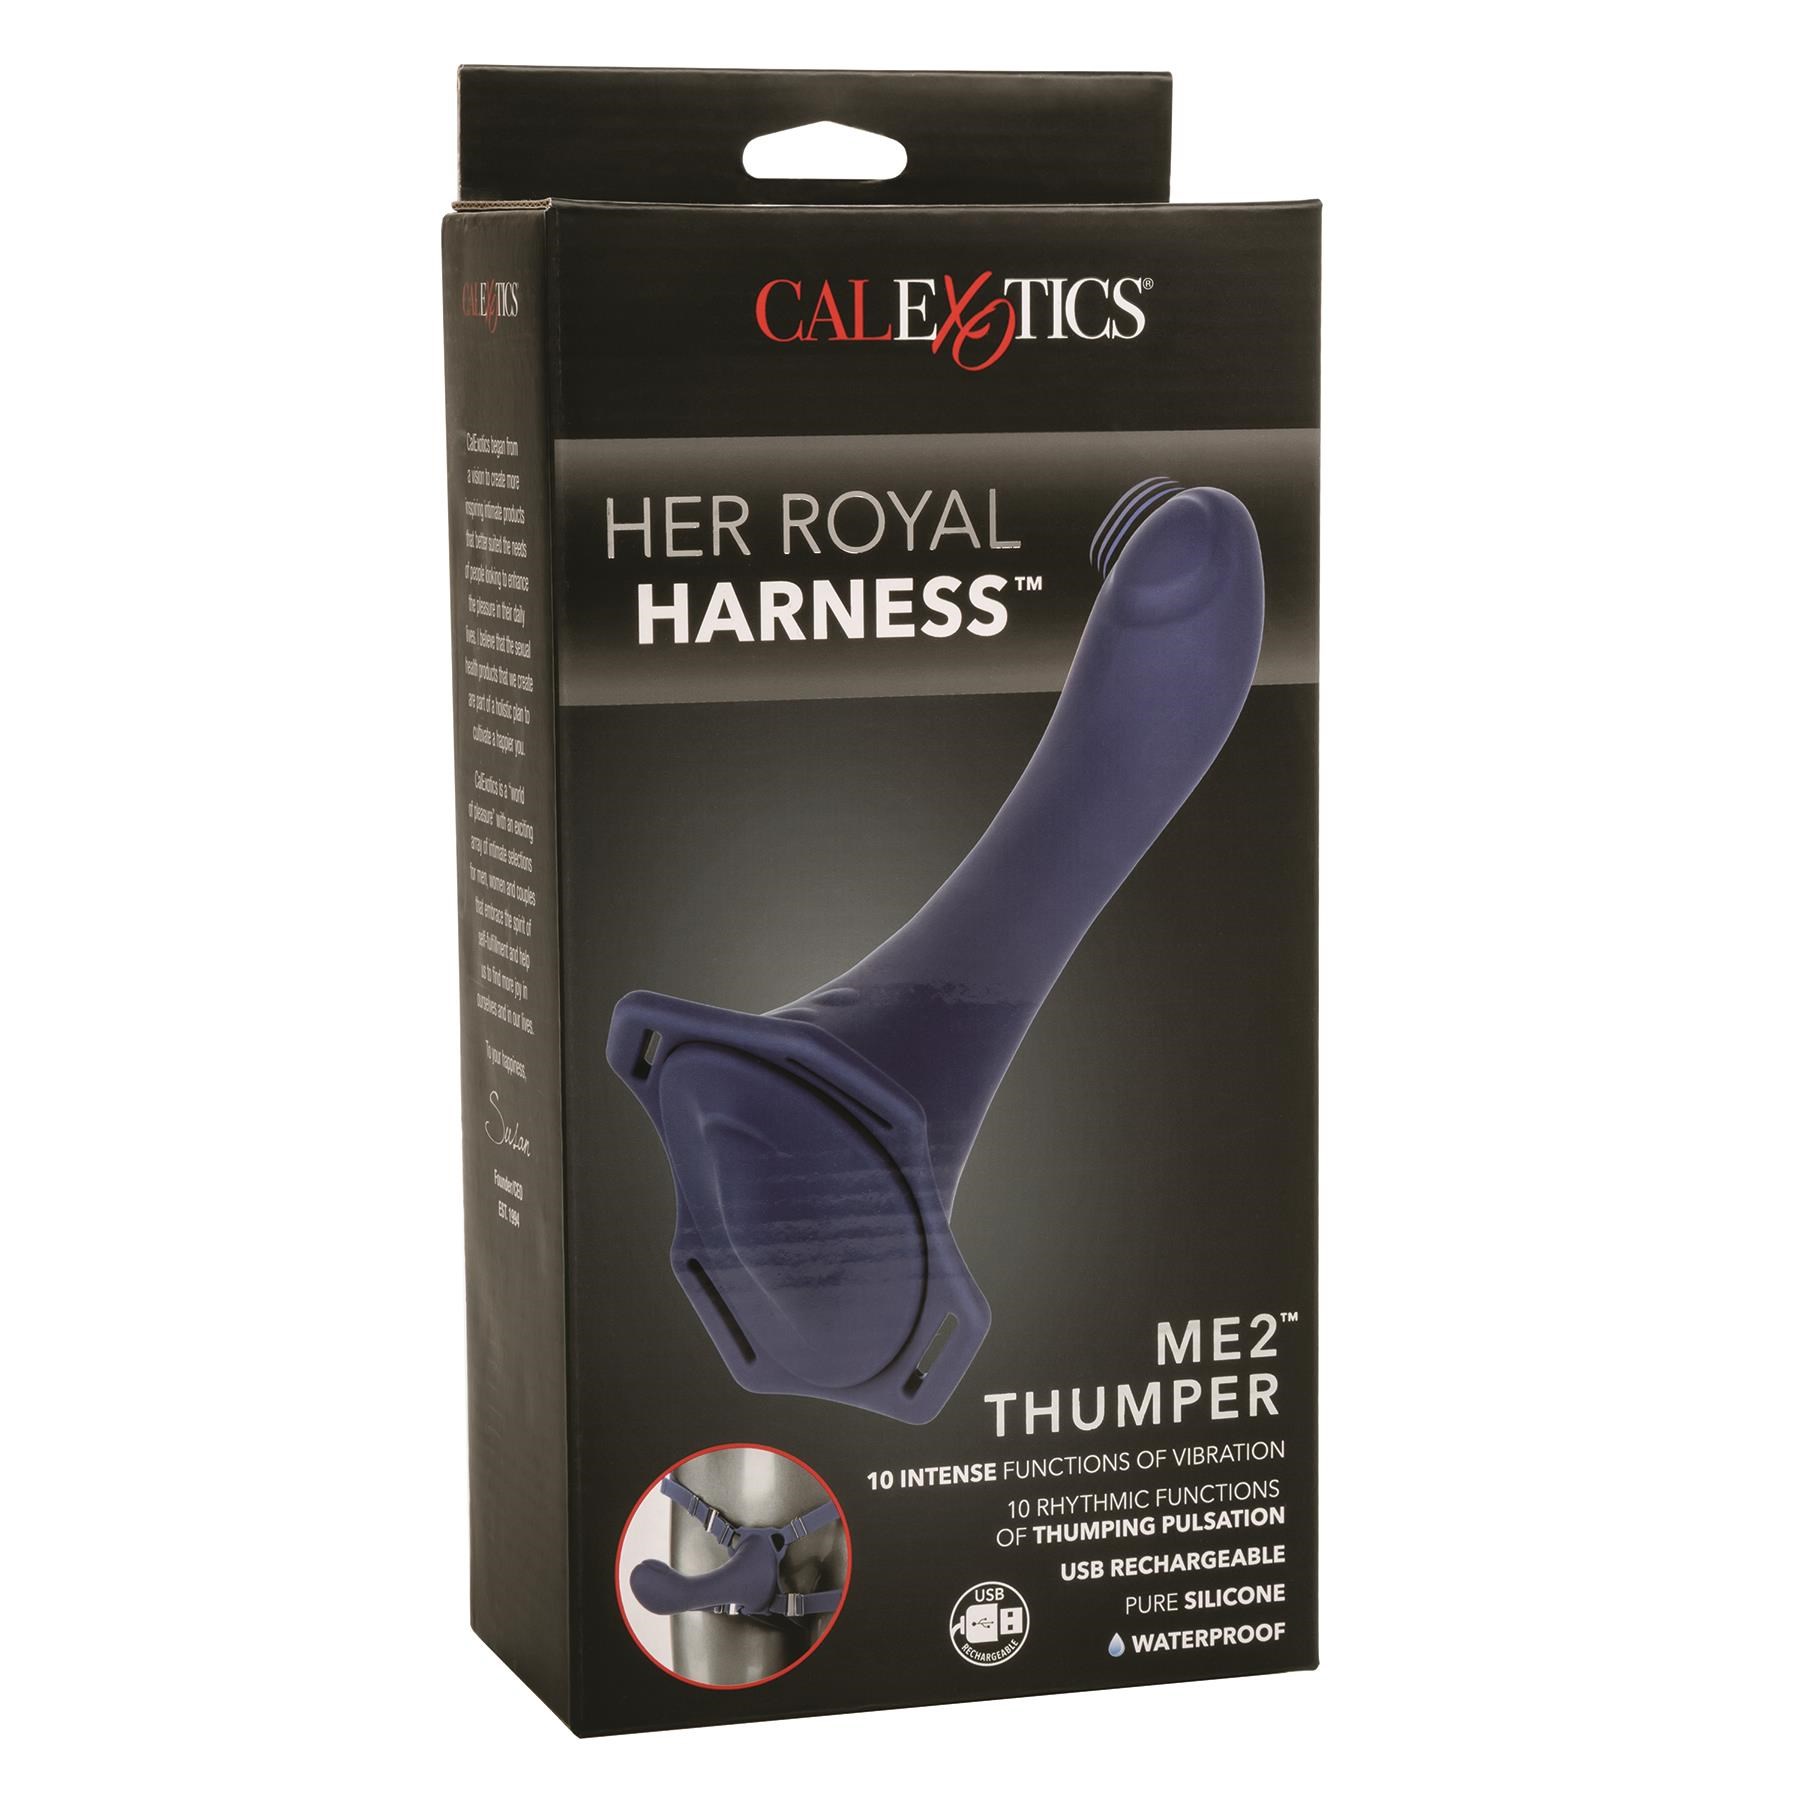 Her Royal Harness With Thumper Dildo Packaging Shot